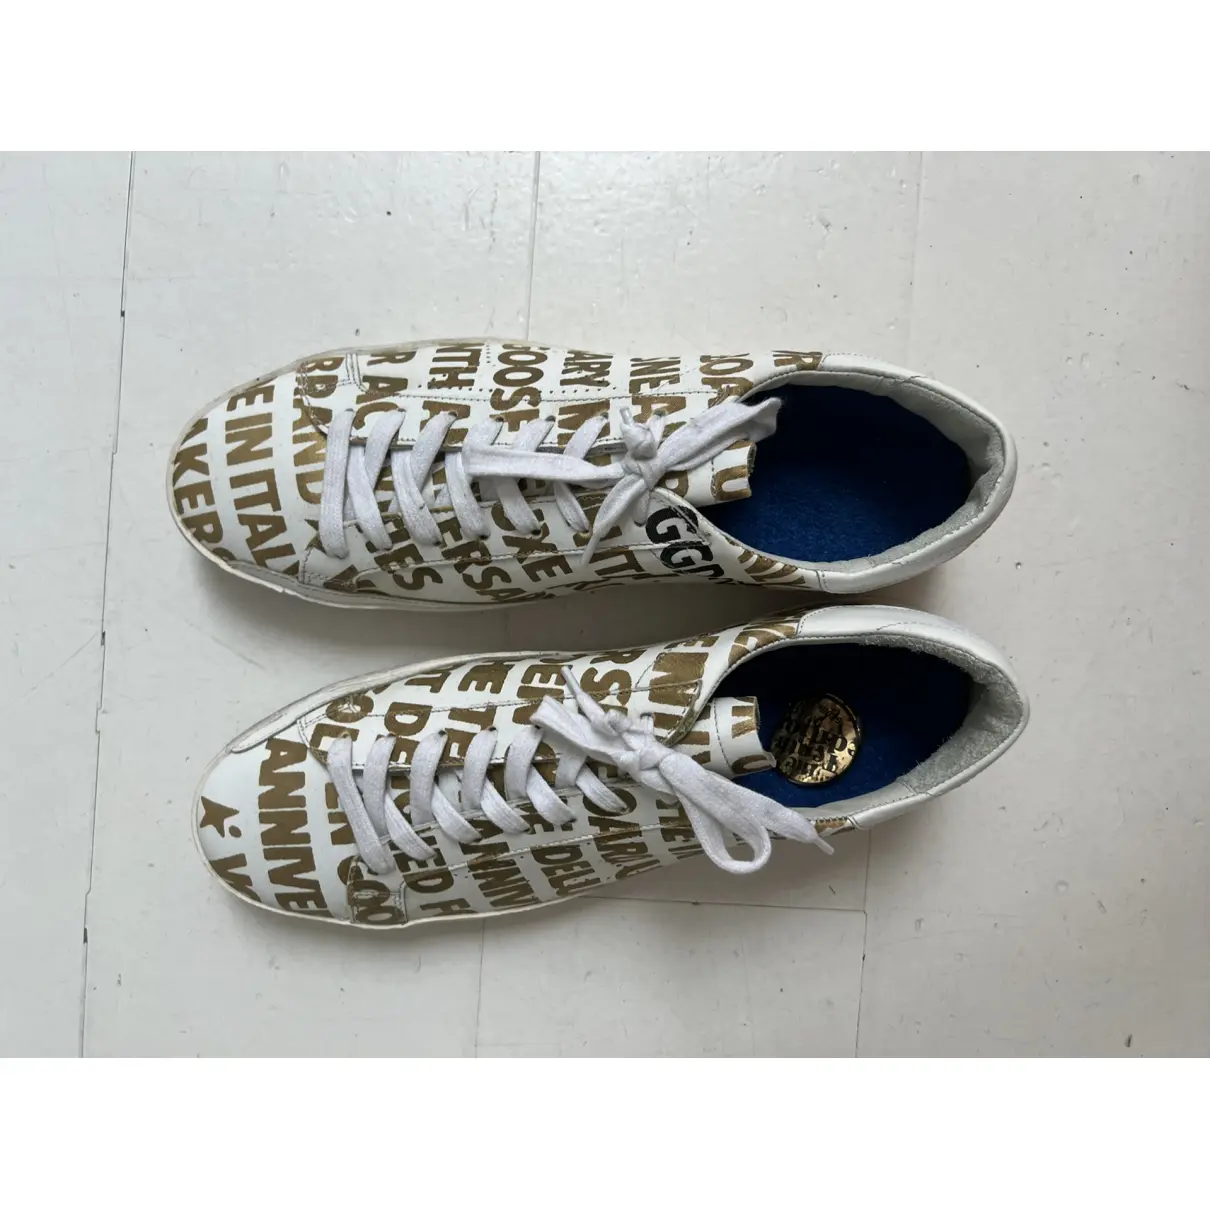 Superstar leather low trainers Golden Goose